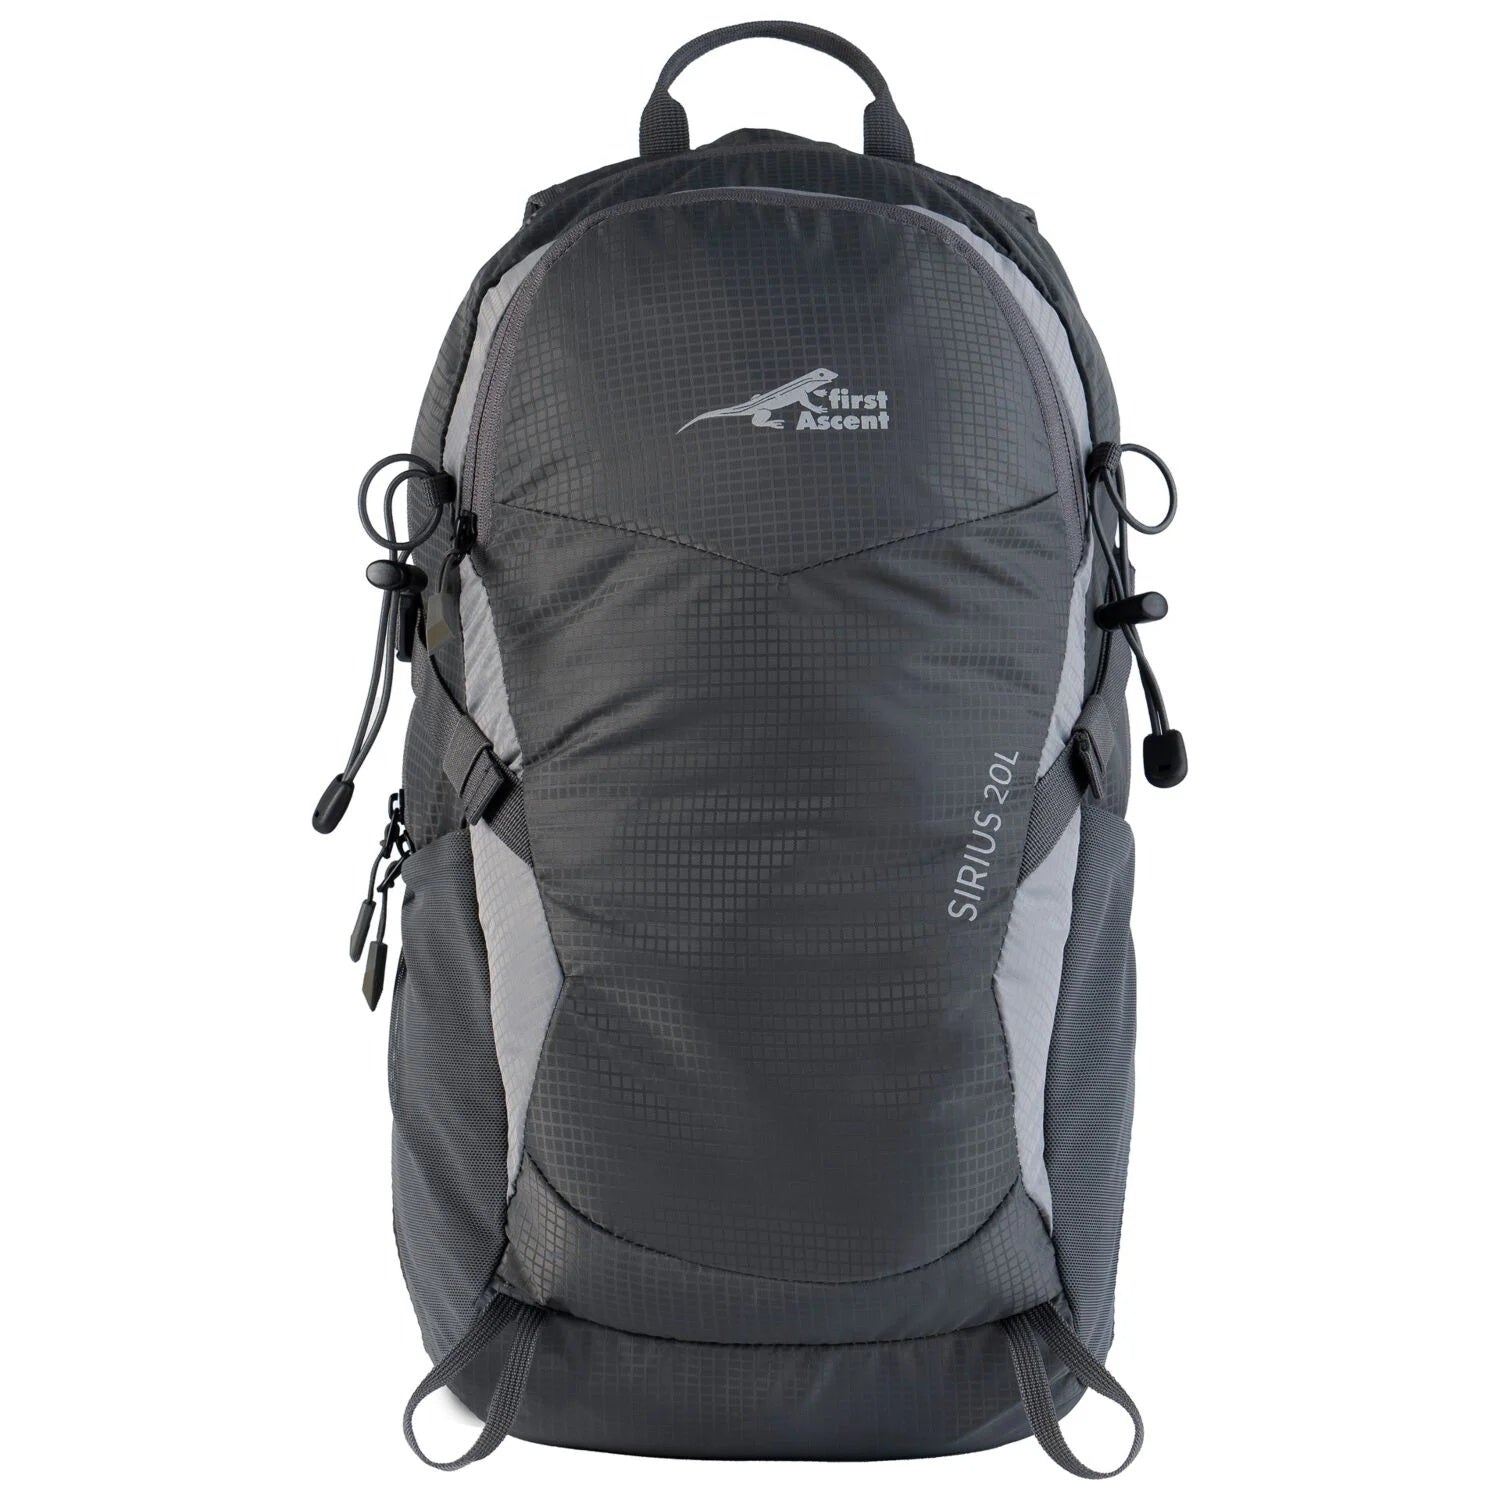 First Ascent Sirius 20L Backpack